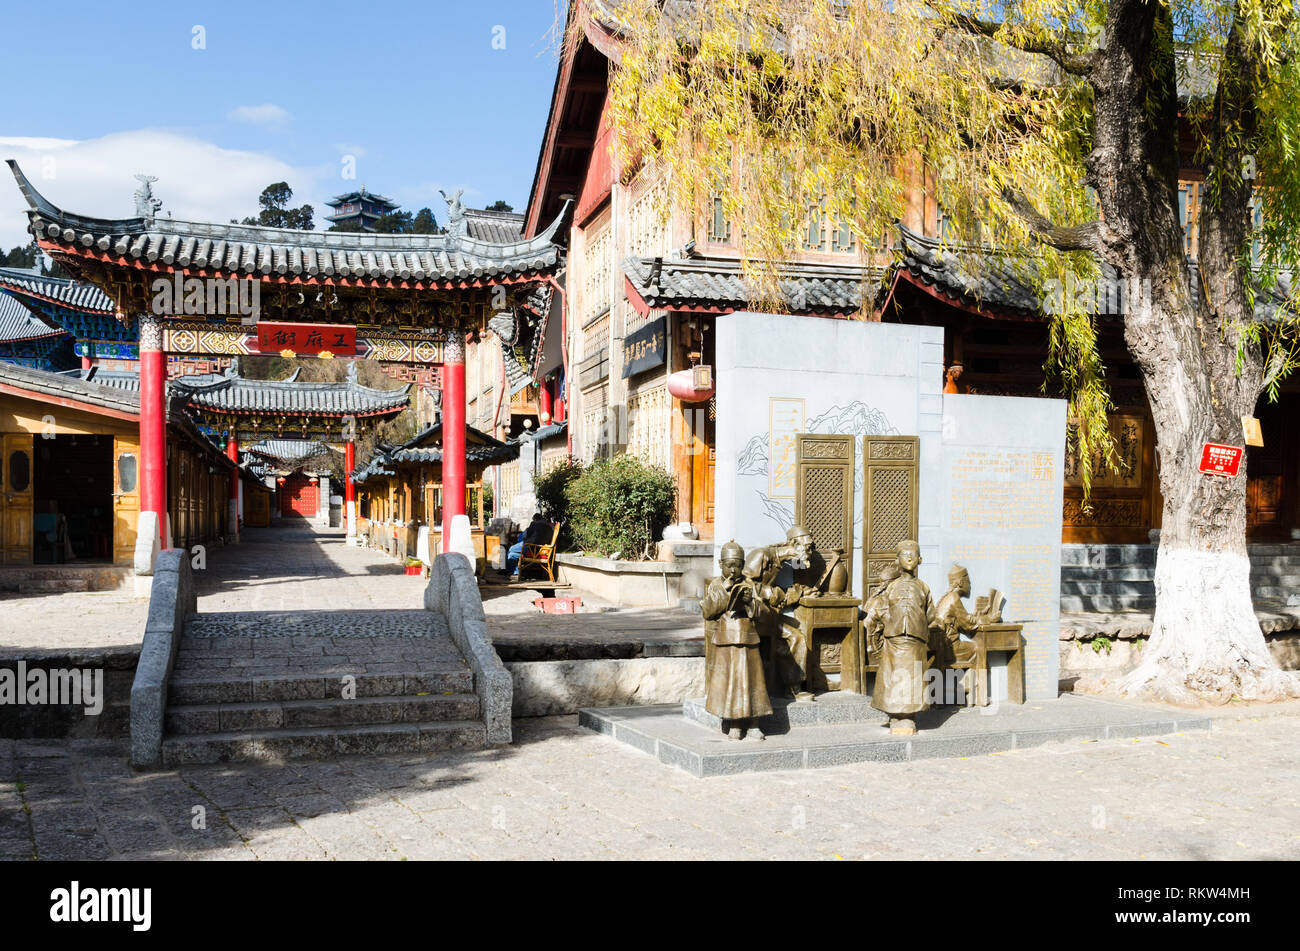 Statues of traditional Chinese teacher and students, Lijiang old town, Yunnan, China Stock Photo